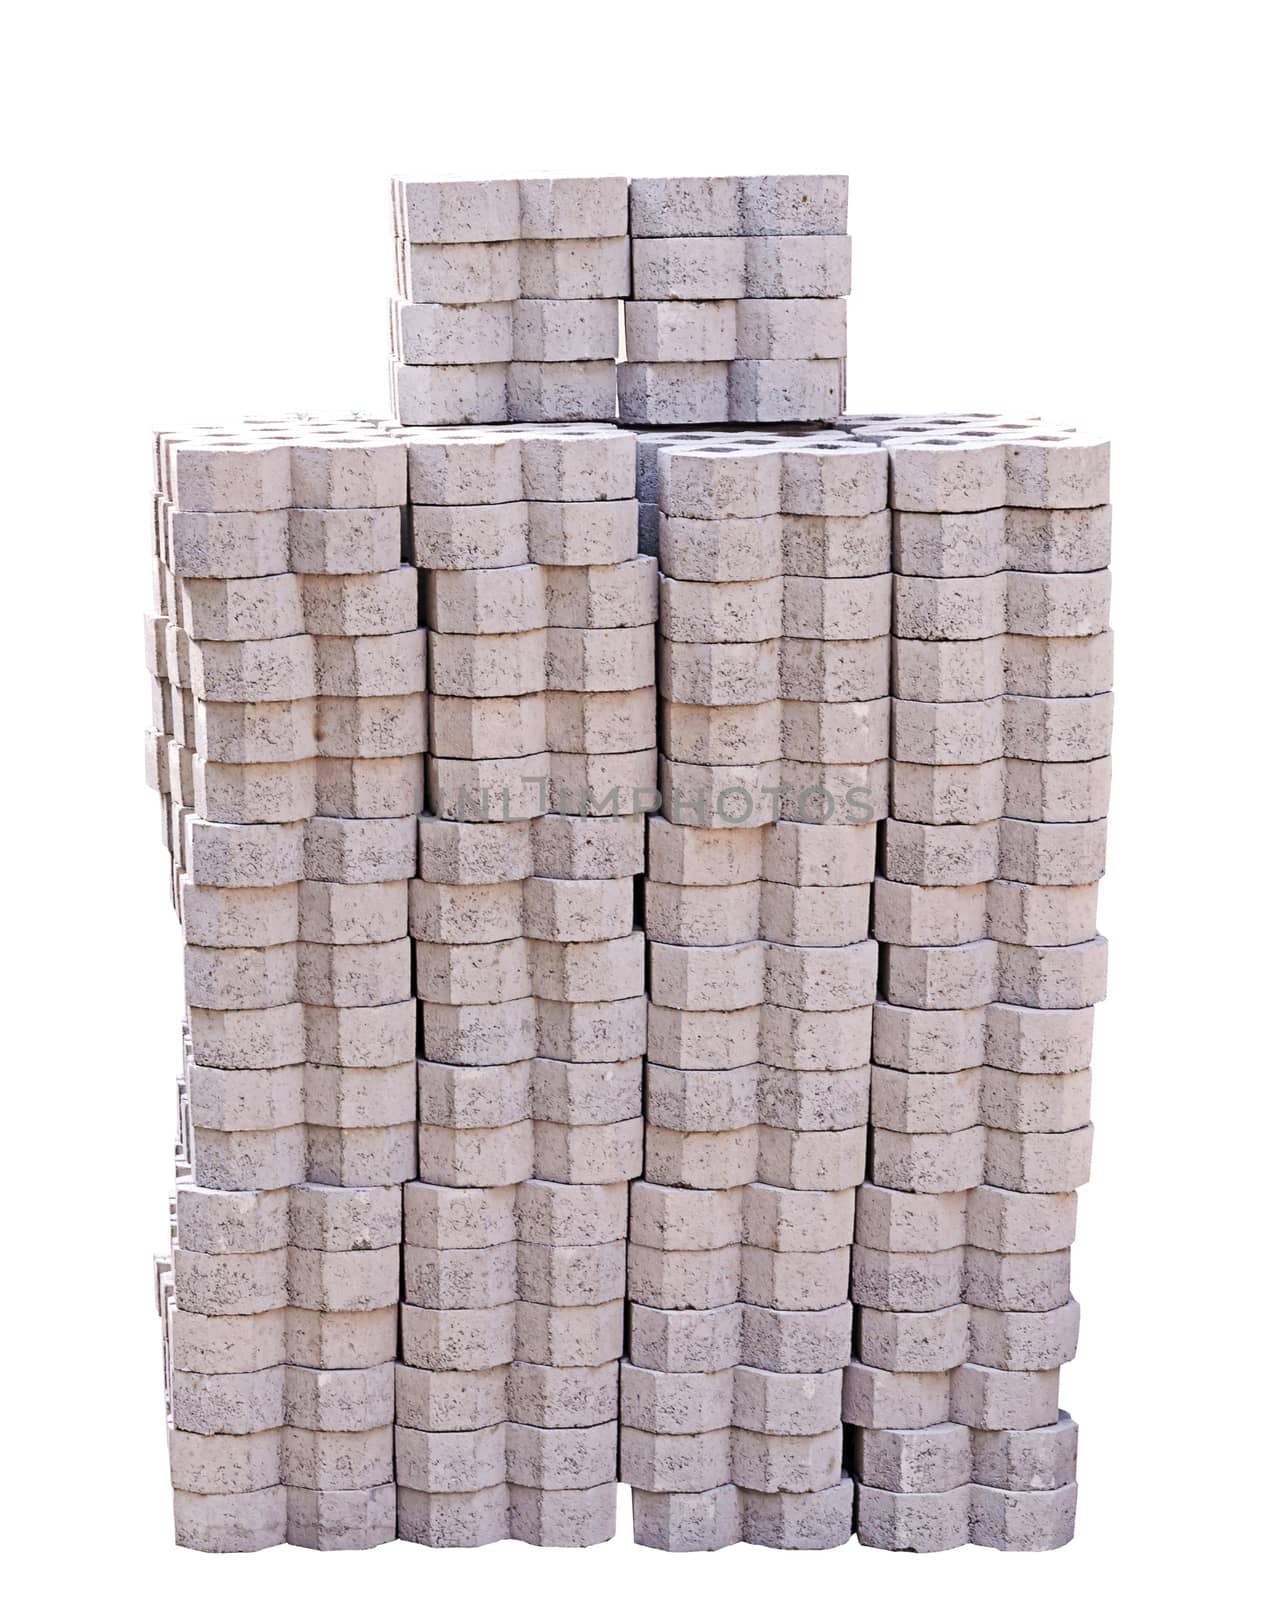 Stack of concrete blocks by NuwatPhoto